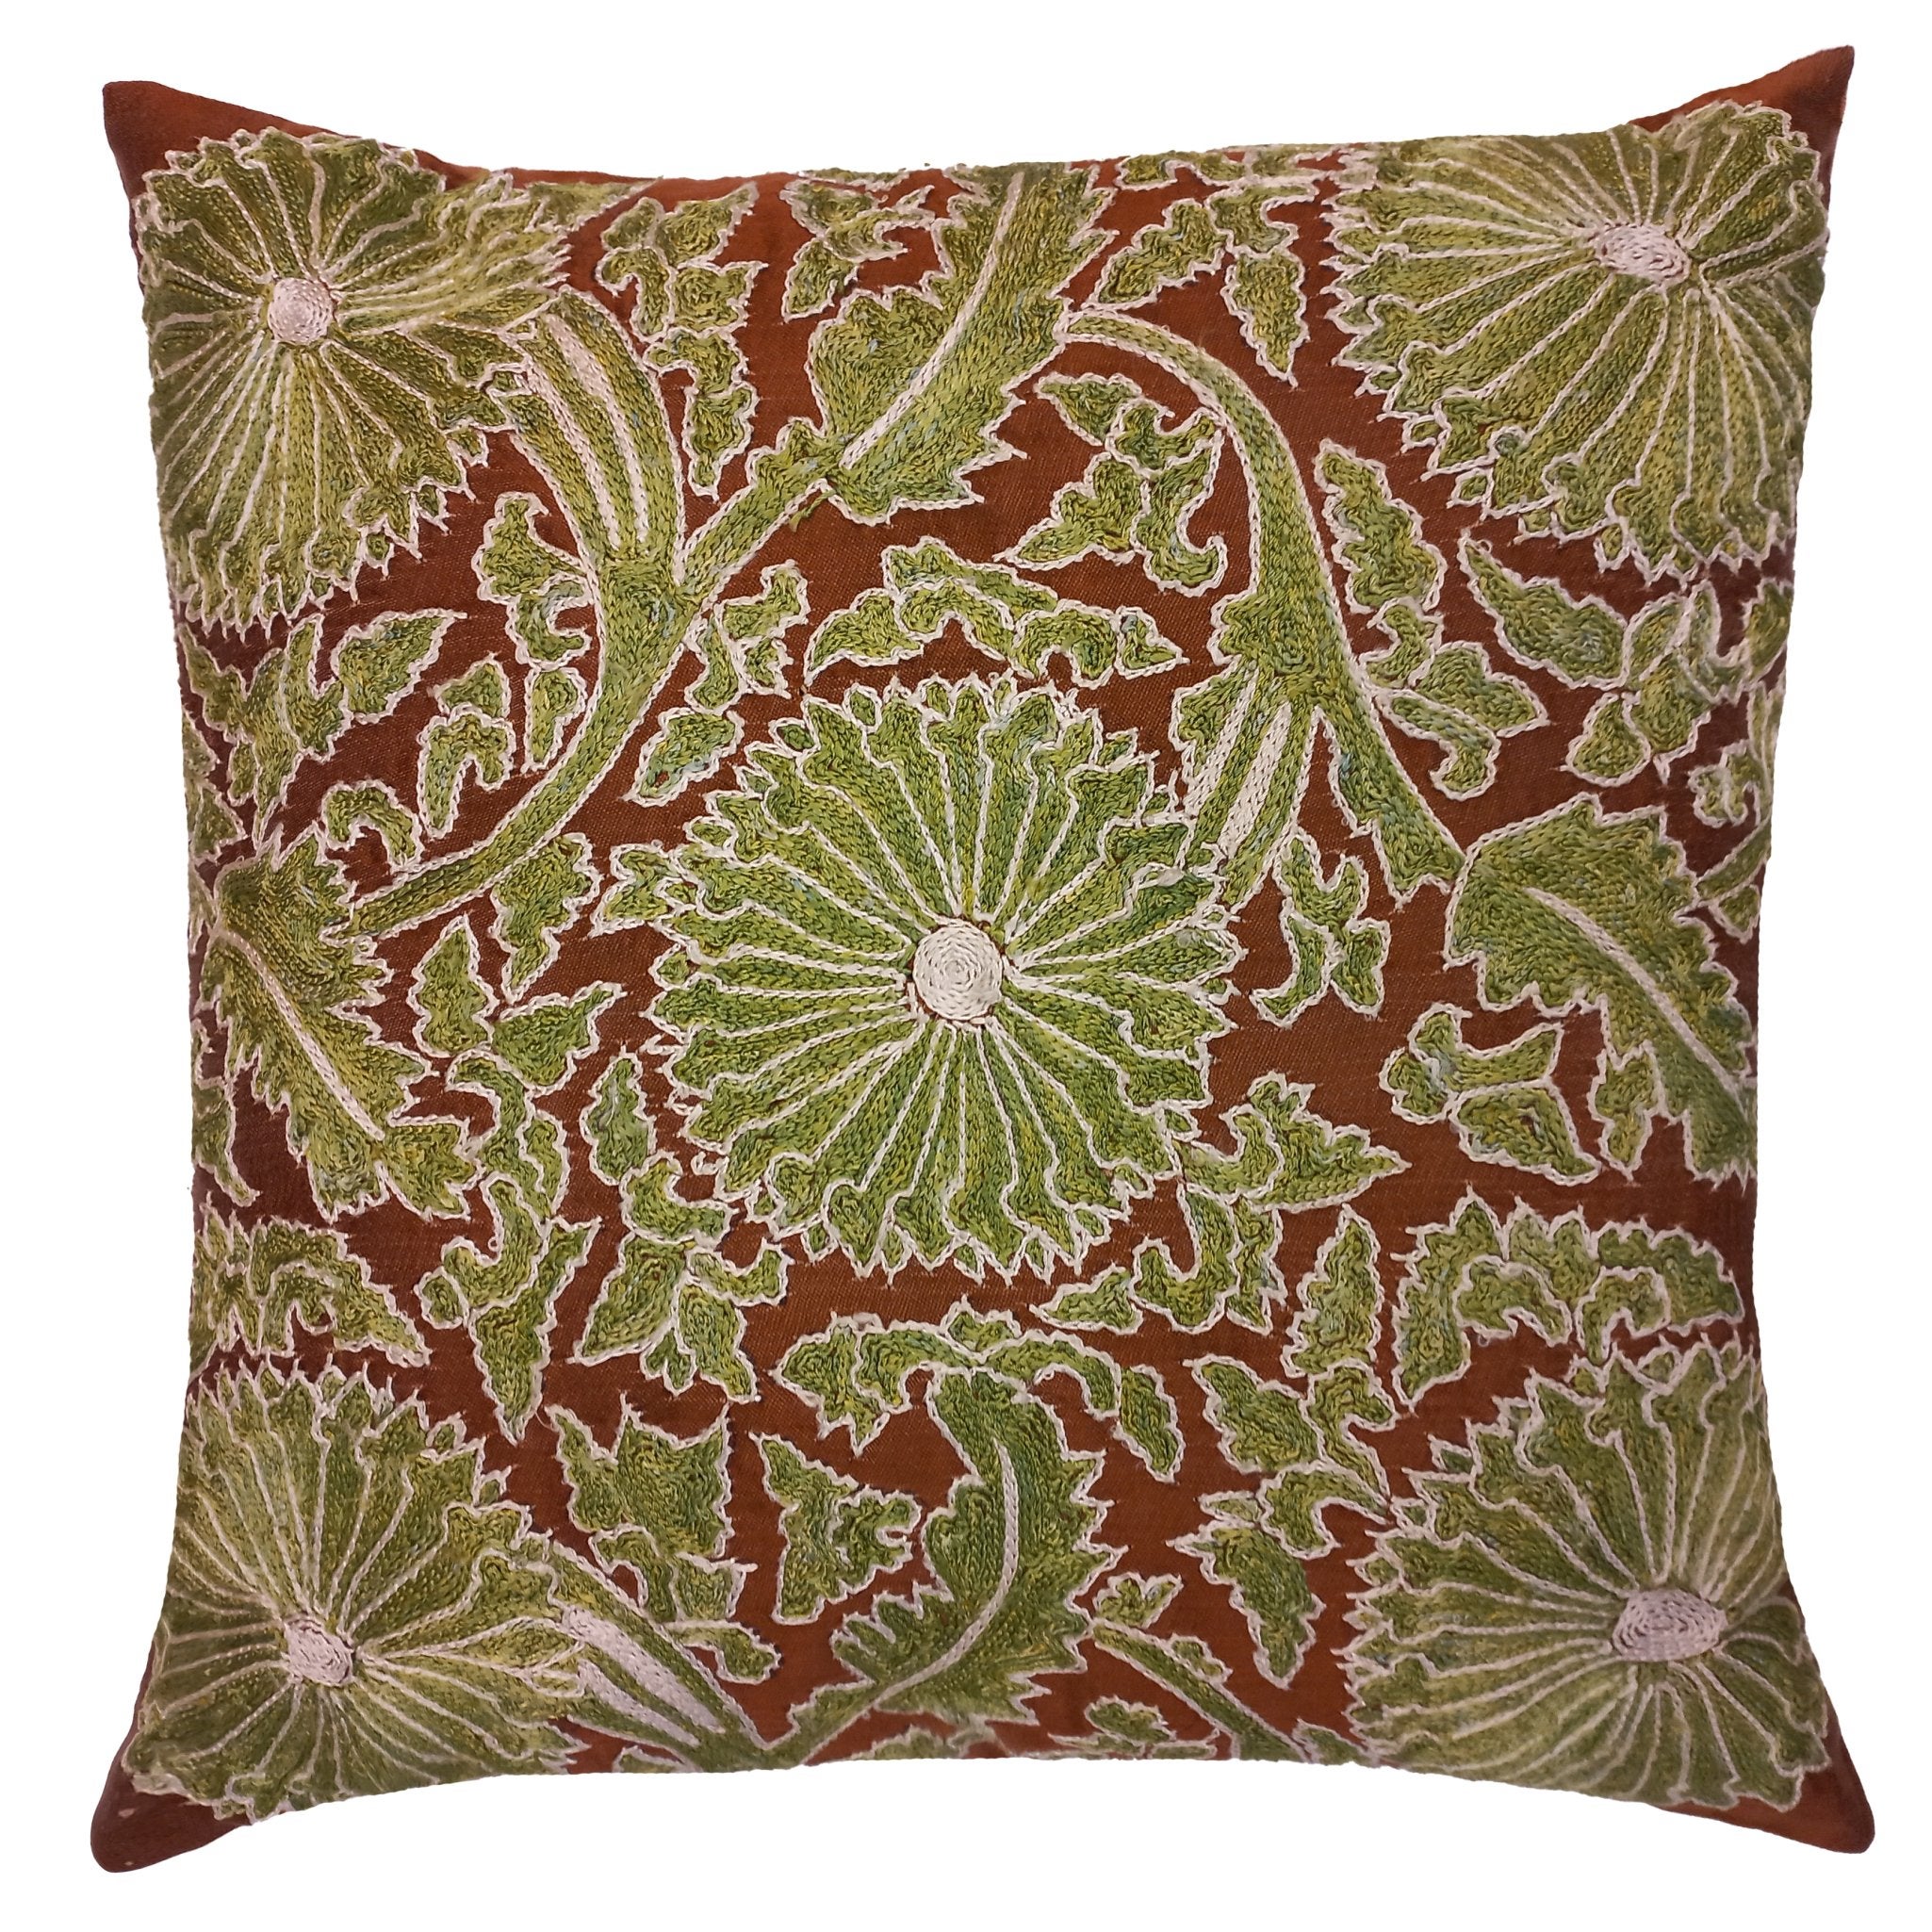 19"x19" Authentic 100% Silk Embroidered Suzani Cushion Cover in Brown & Green For Sale